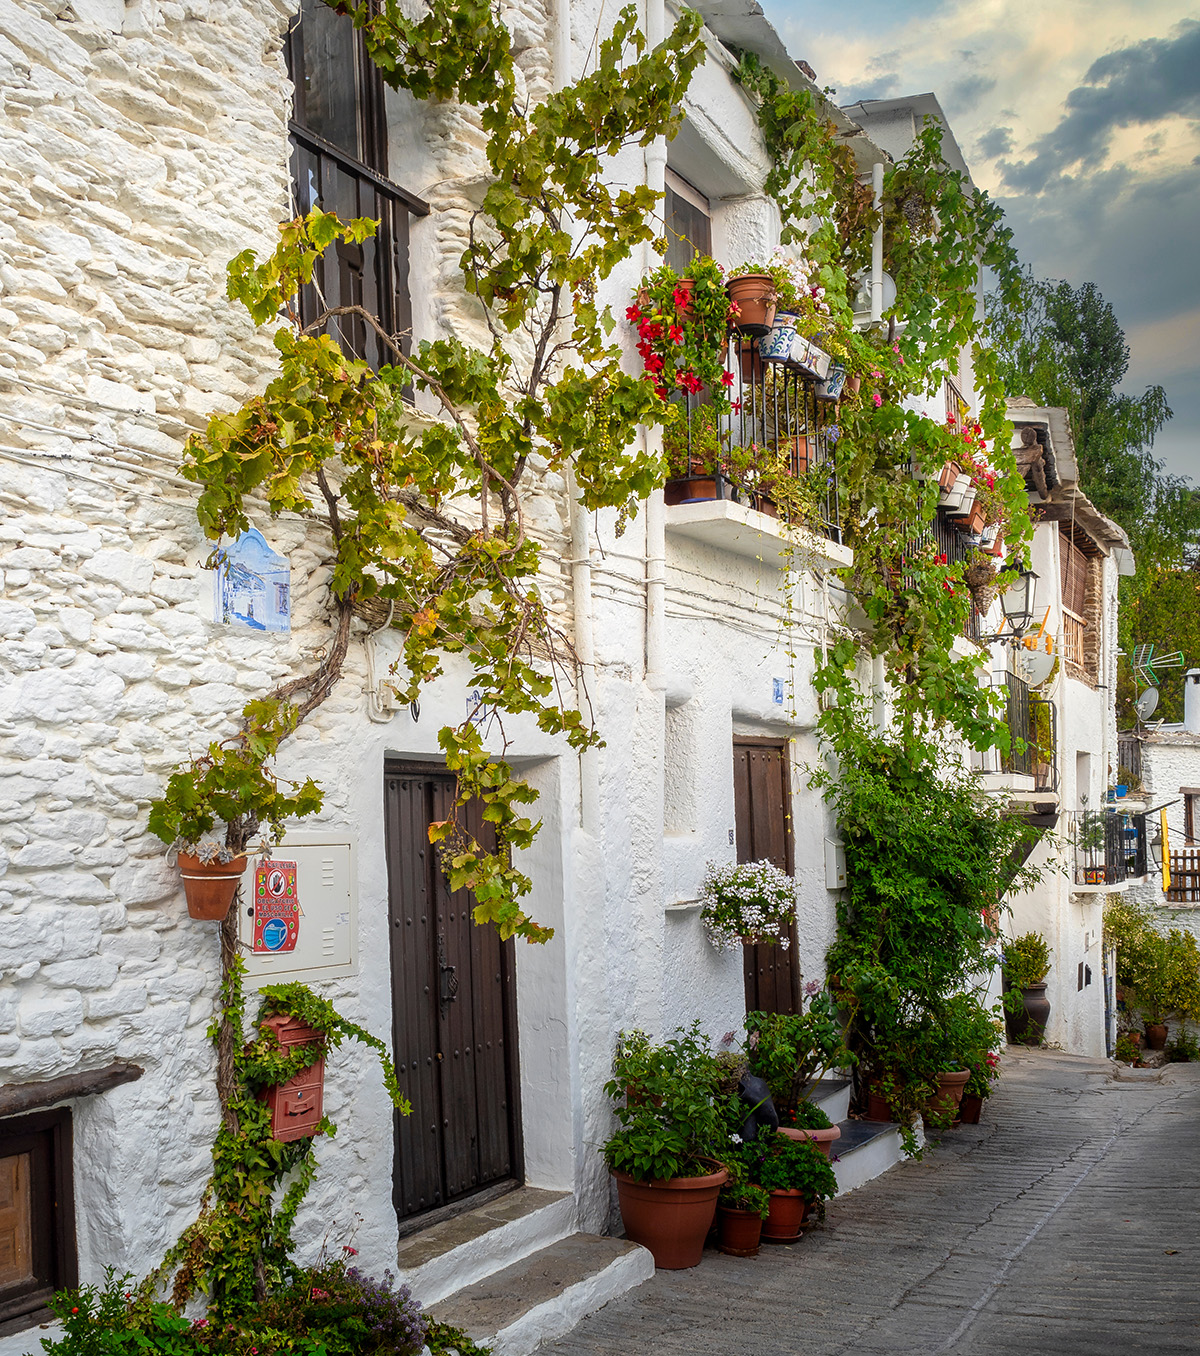 Typical village street of the Alpujarra, white houses and wooden terraces.